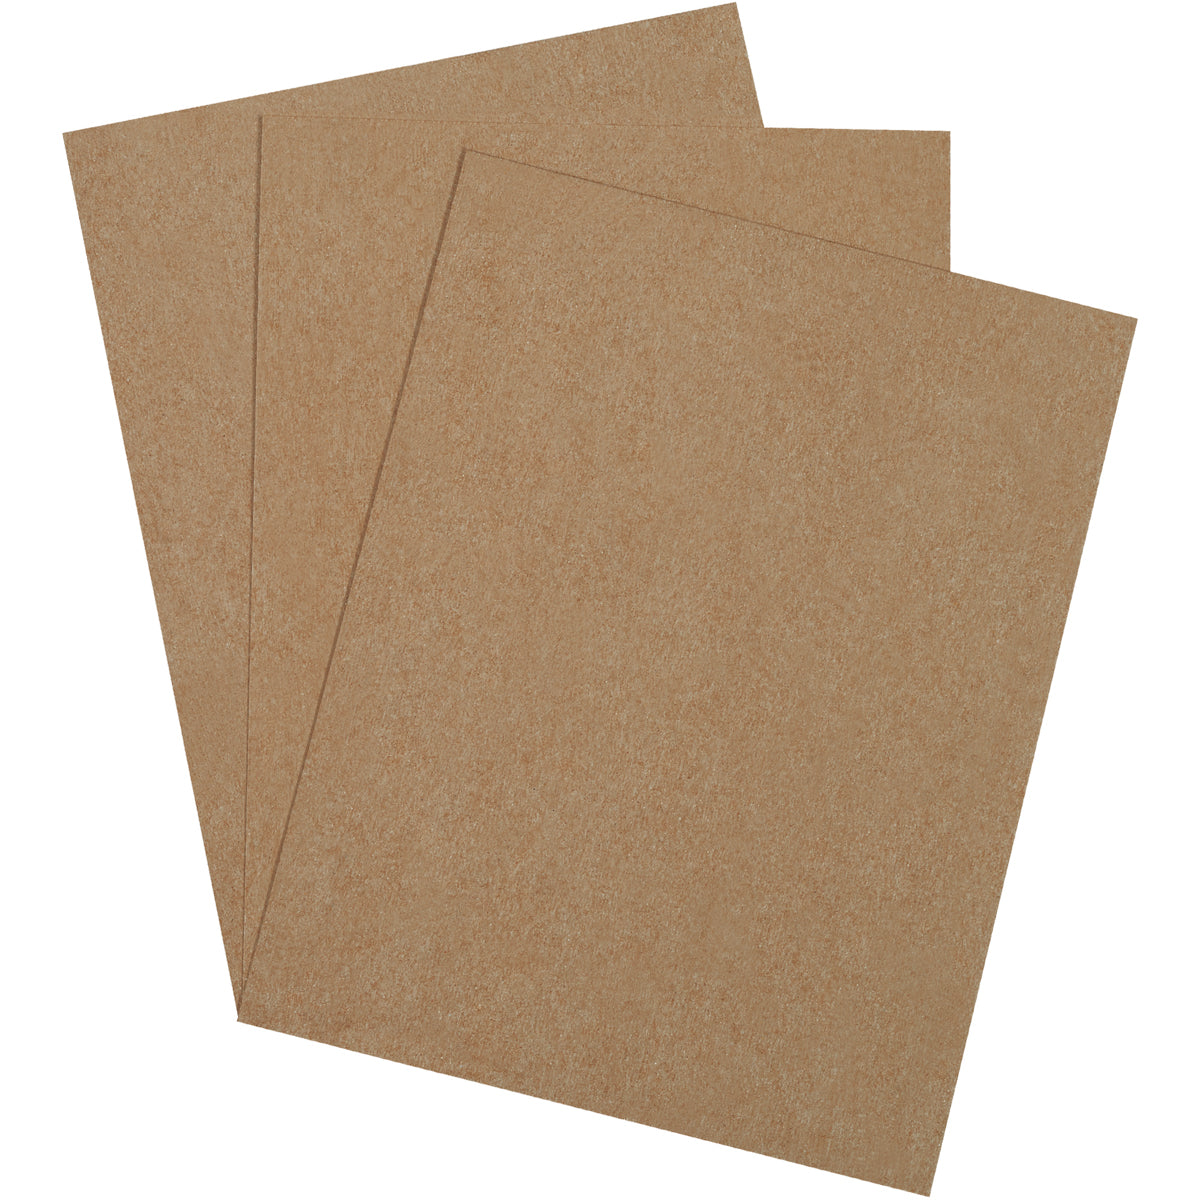 White Cardboard Sheet 8 1/2 X 11 - .022 Thick | Quantity: 480 by Paper  Mart